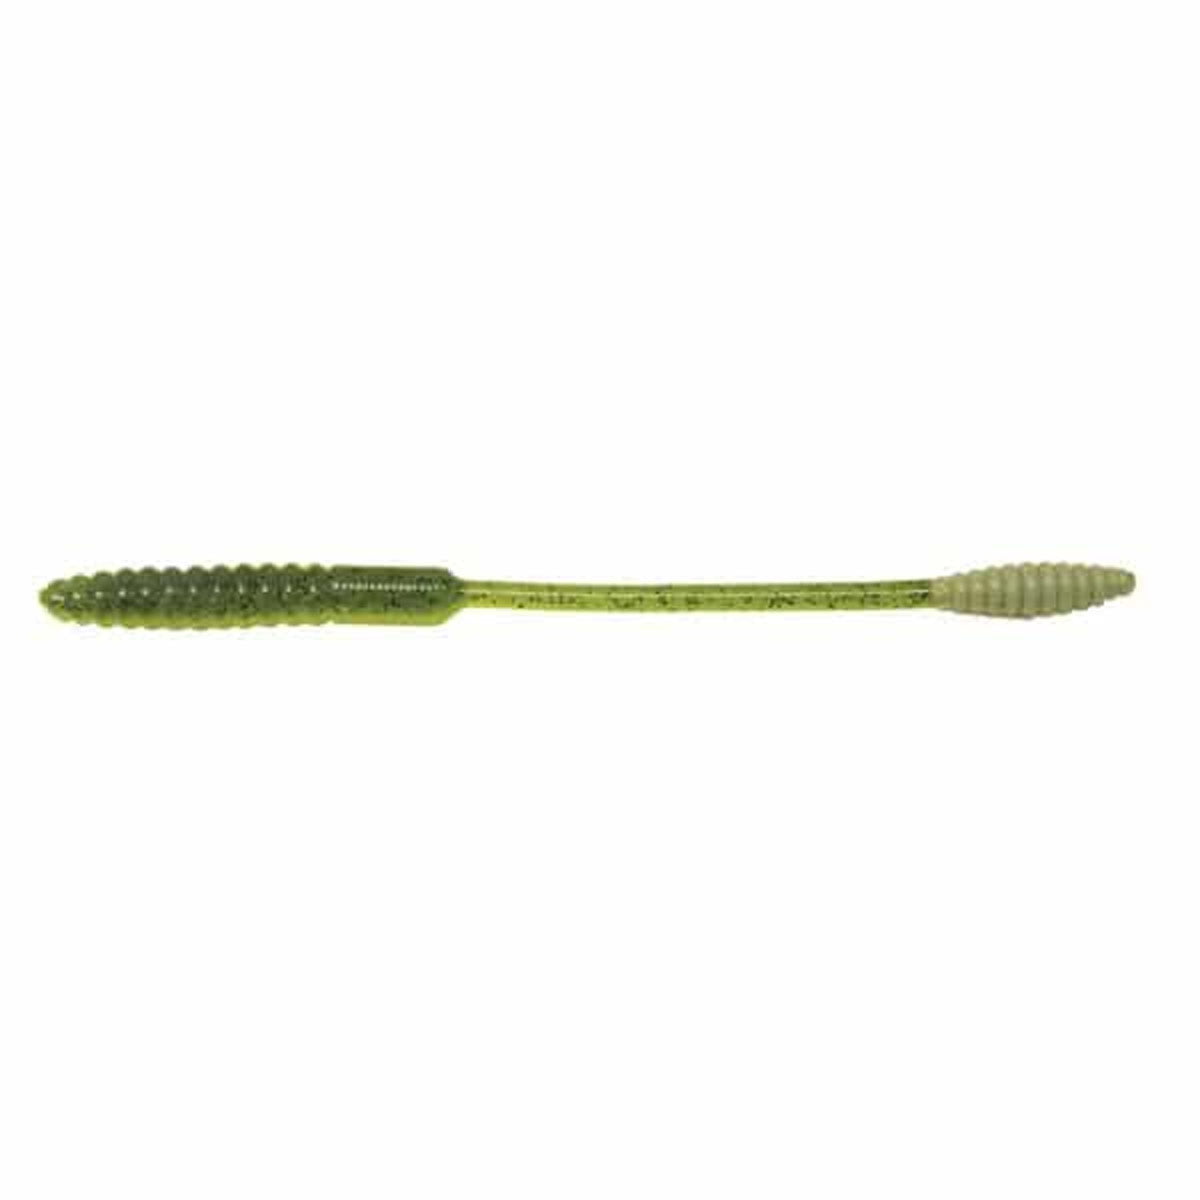 Big Bite Baits Squirrel Tail Worm SS Shad 4.5" 10 pack 